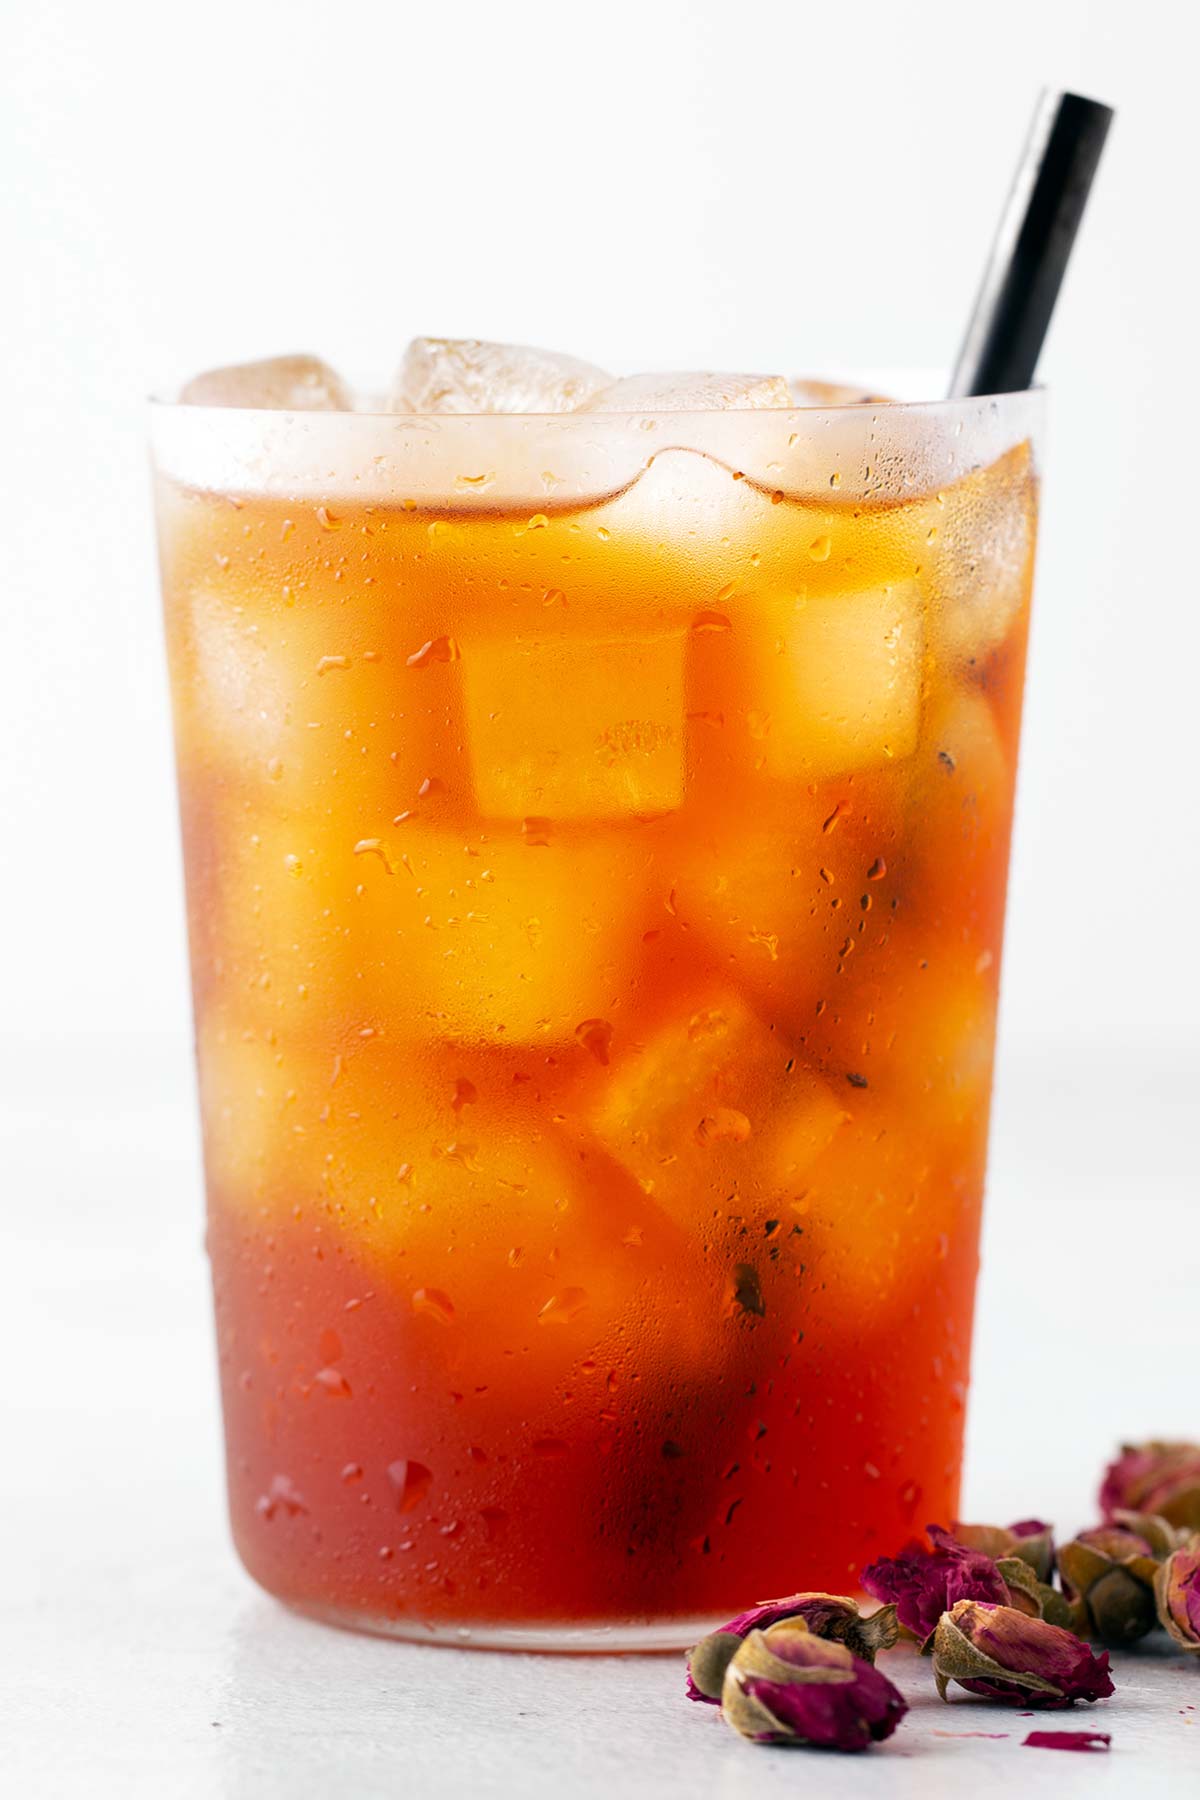 Rose iced tea in a cup with a black straw.